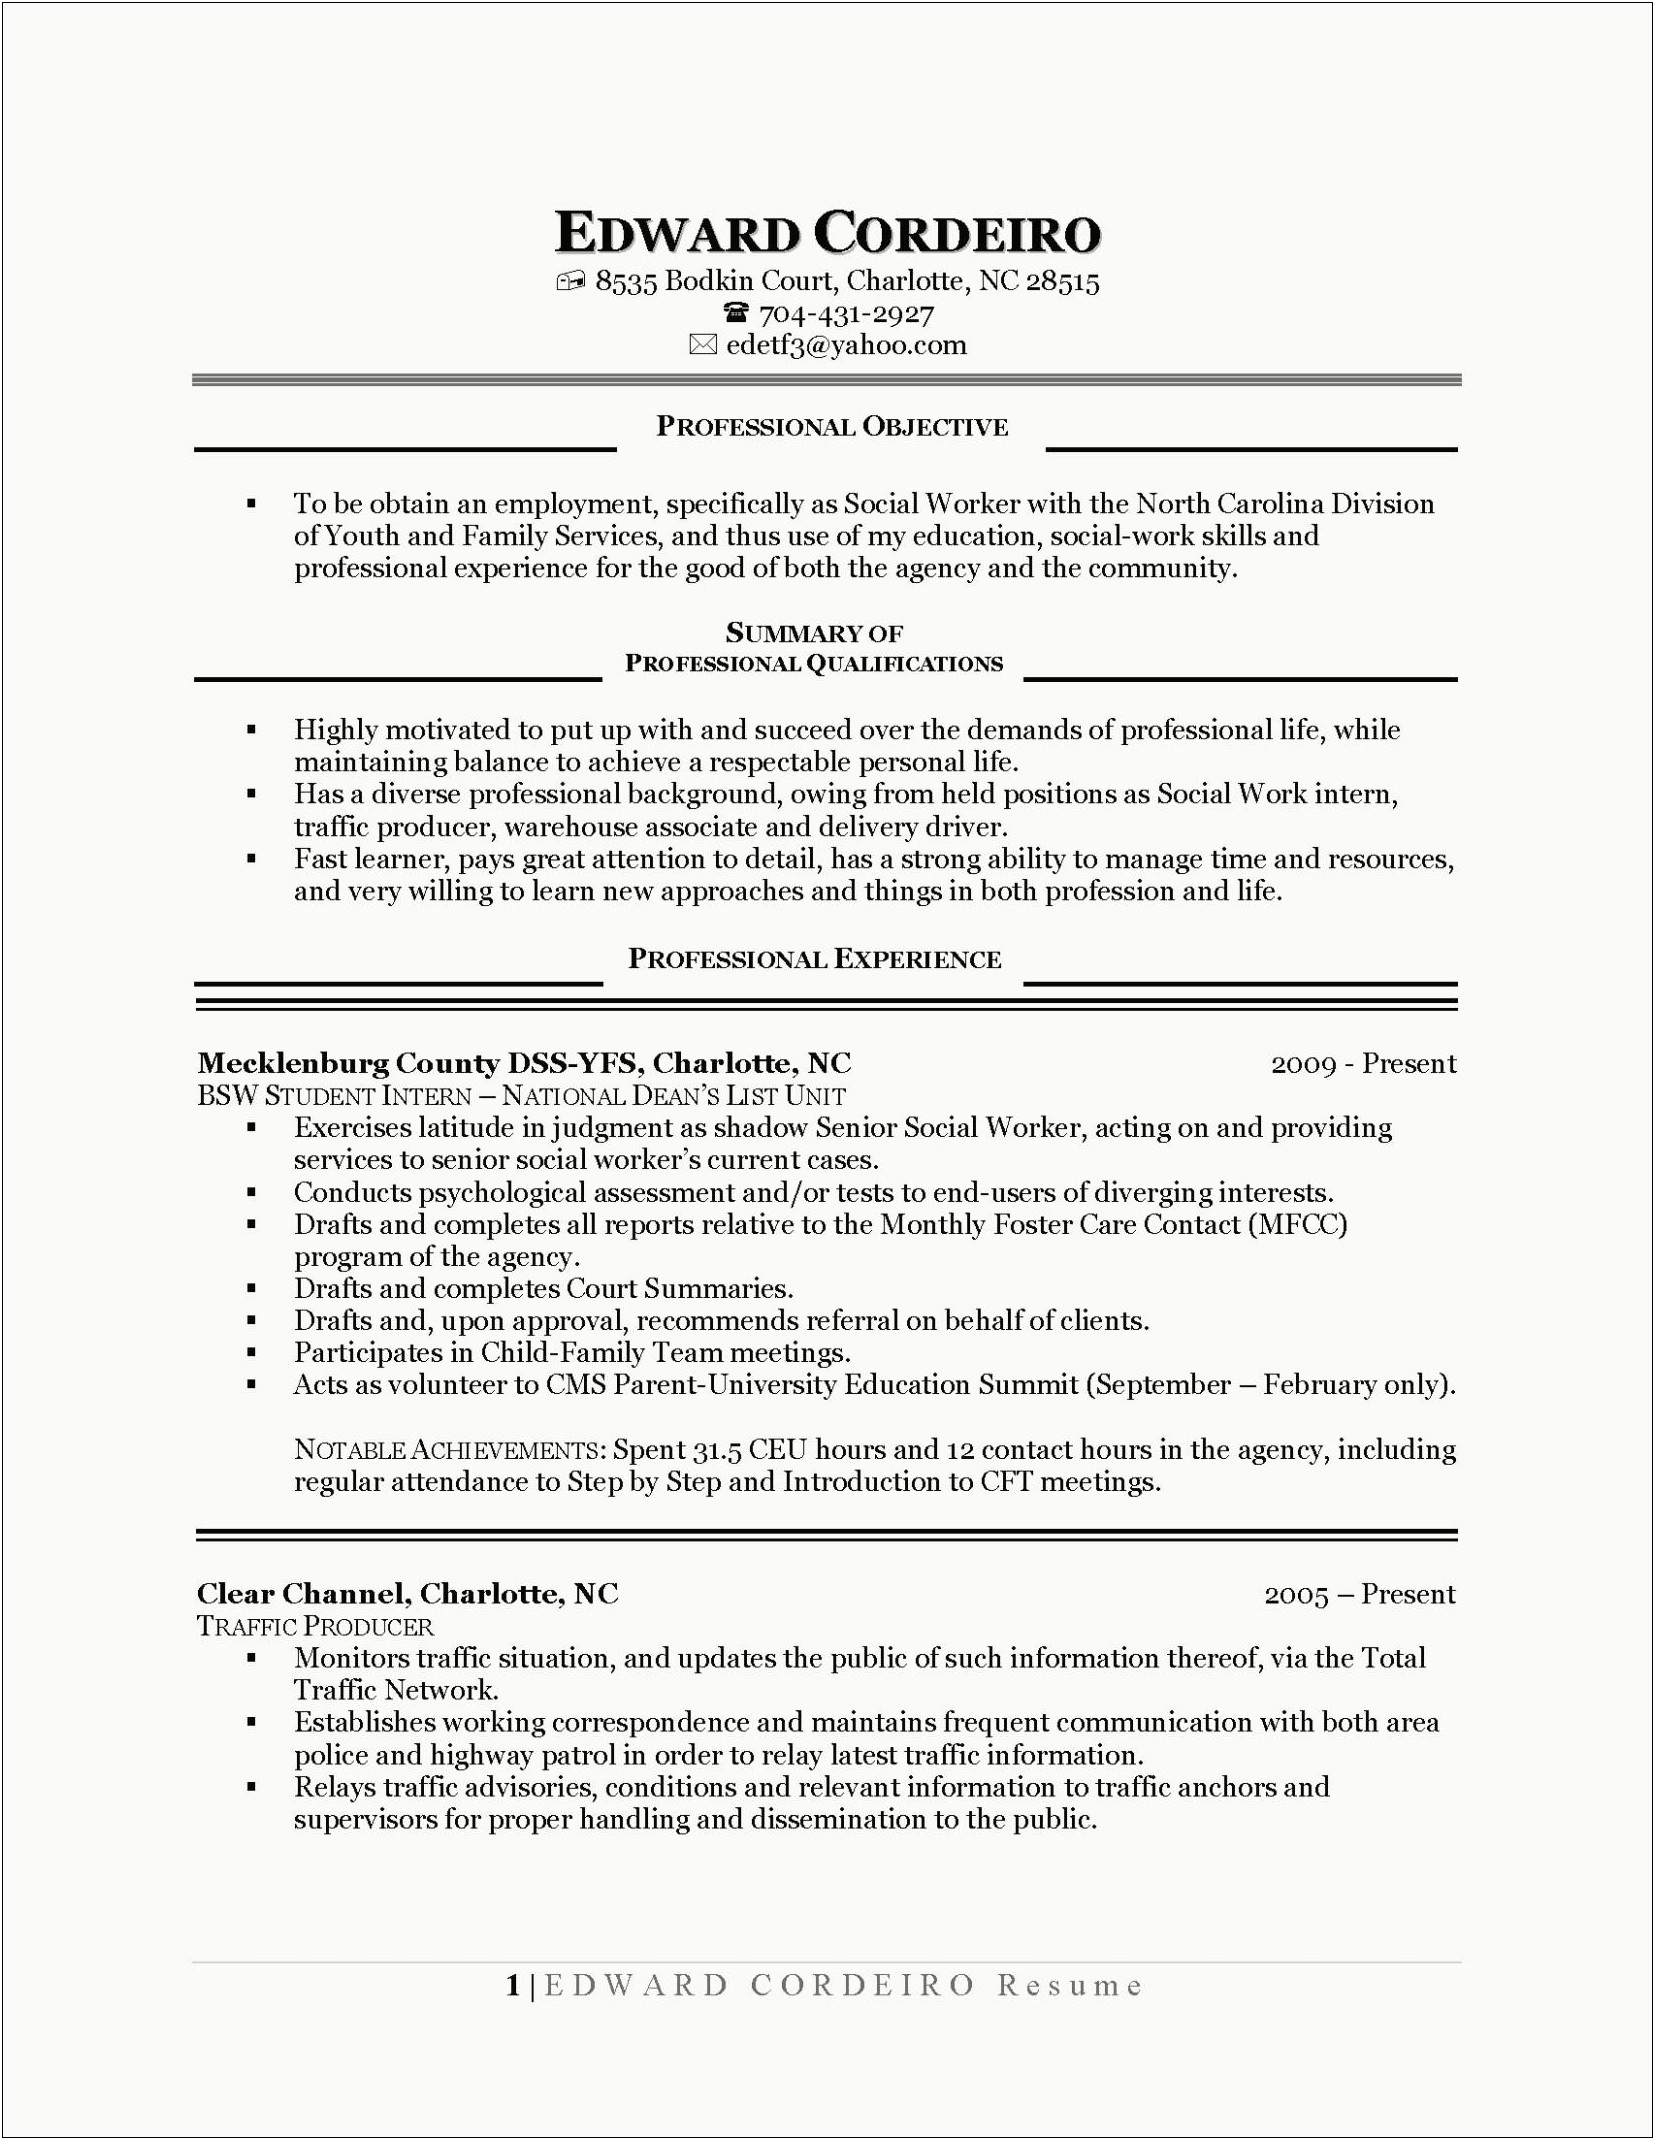 Resume With Agency Contact Sample